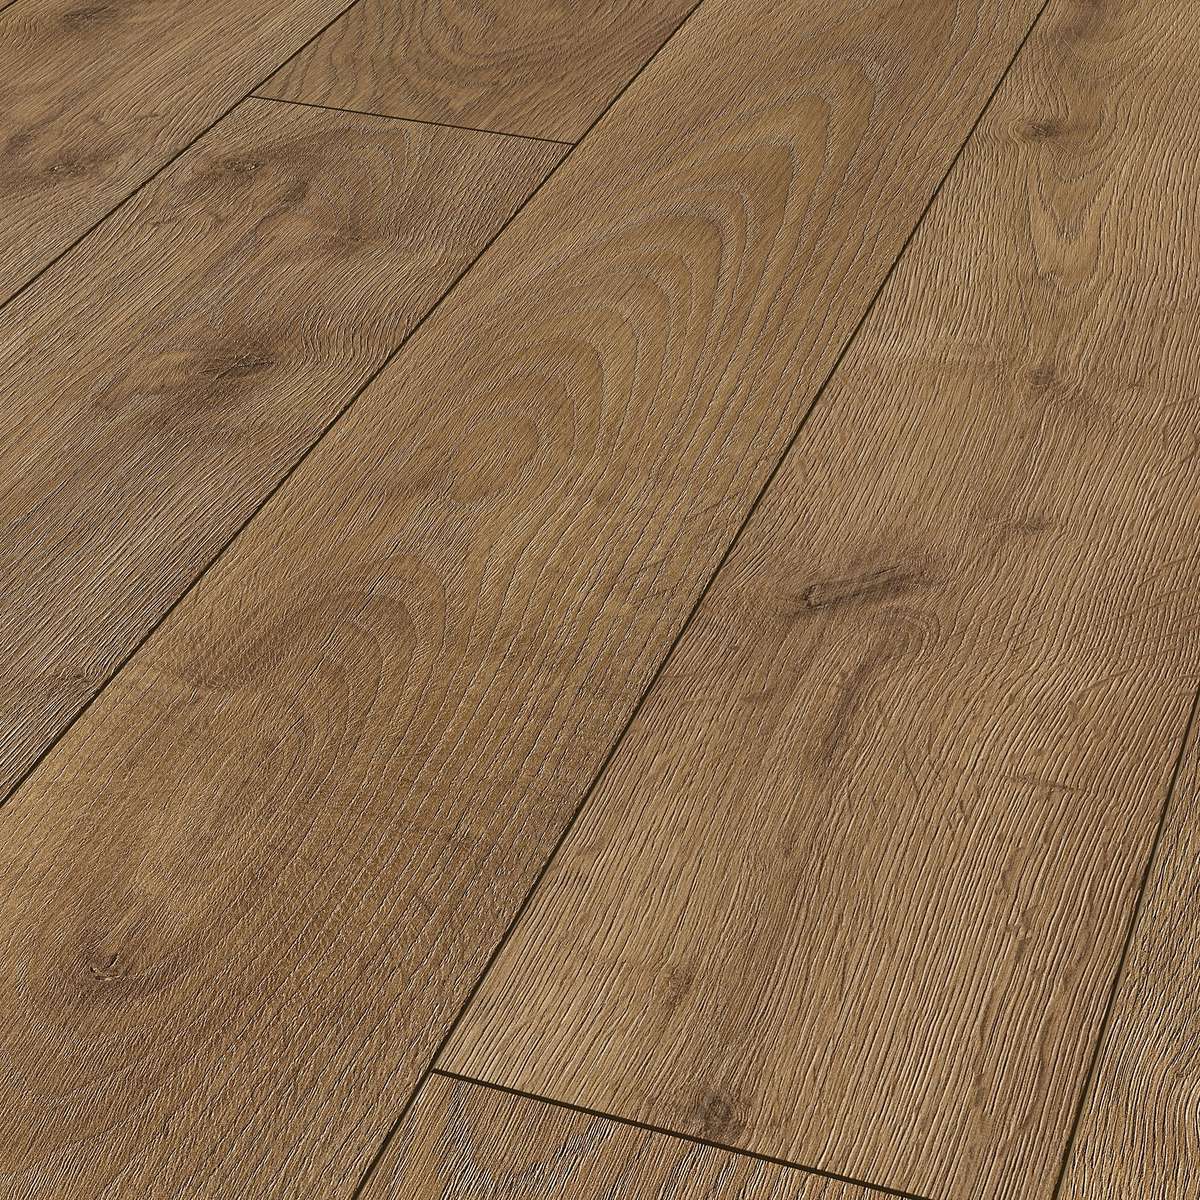 Bergen Oak Or Albero White Oak Laminate Flooring 1 48m2 8 50 5 74 Sqm With Free C C Or Delivery Over 75 7 95 If Under From Wickes Hotukdeals